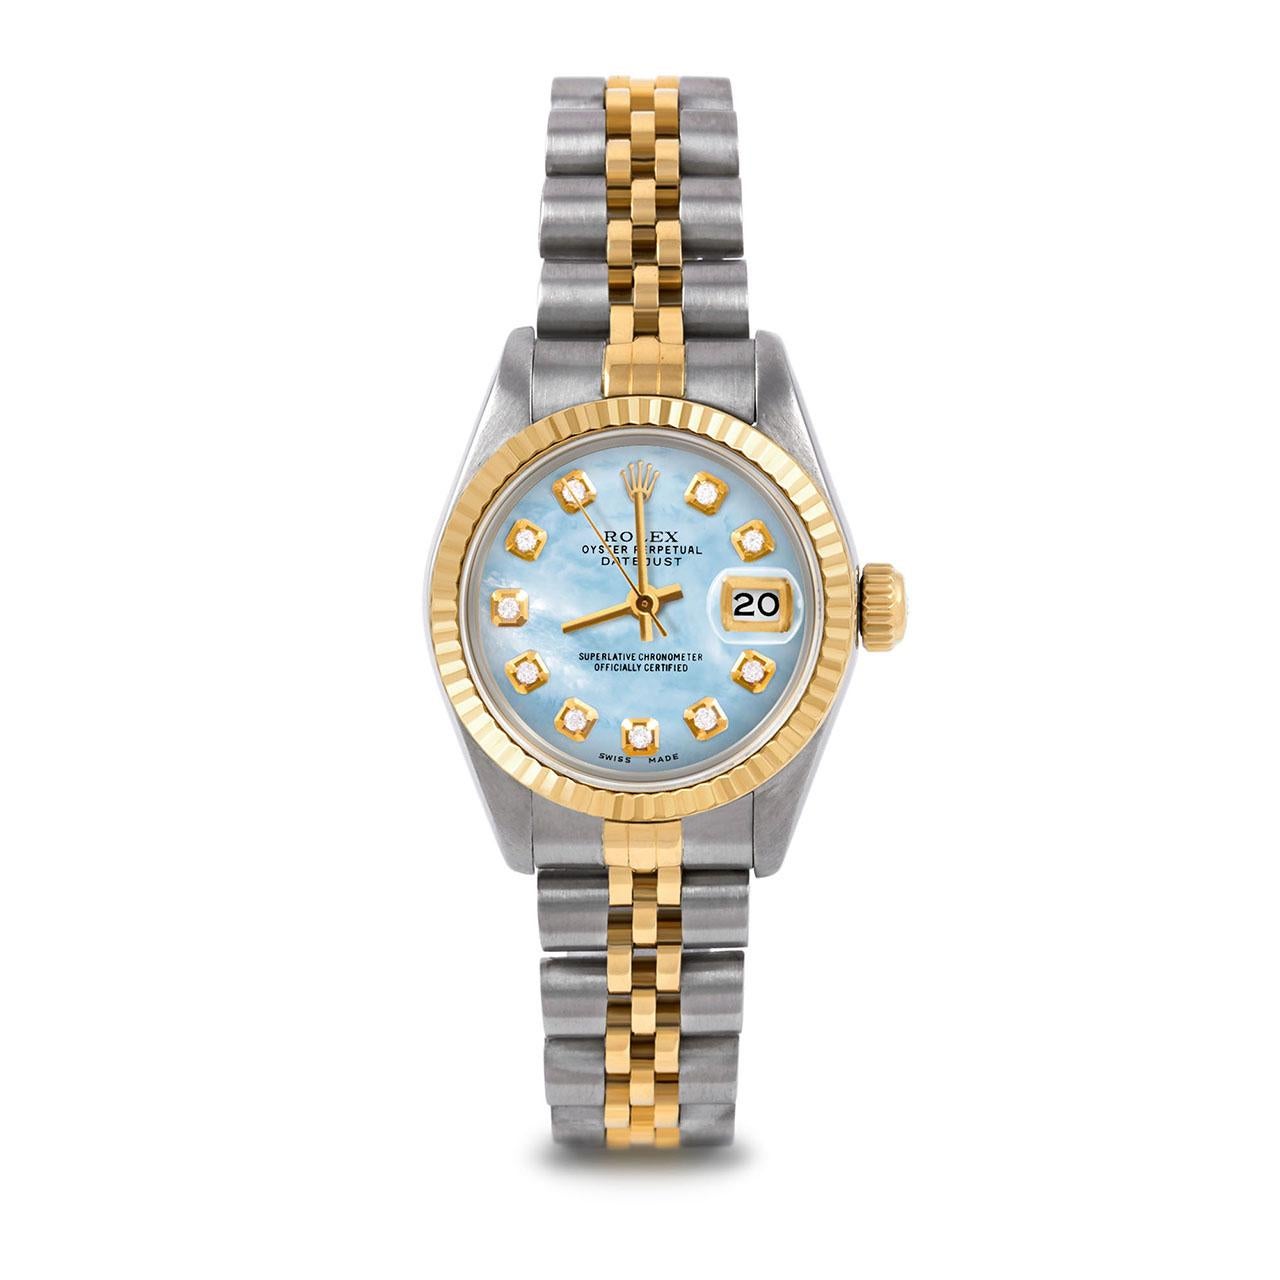 Pre-Owned Rolex 6917 Ladies 26mm Two Tone Datejust Watch, Custom Light Blue Mother of Pearl Diamond Dial & Fluted Bezel on Rolex 14K Yellow Gold And Stainless Steel Jubilee Band.   

SKU 6917-TT-LBMOP-DIA-AM-FLT-JBL


Brand/Model:        Rolex